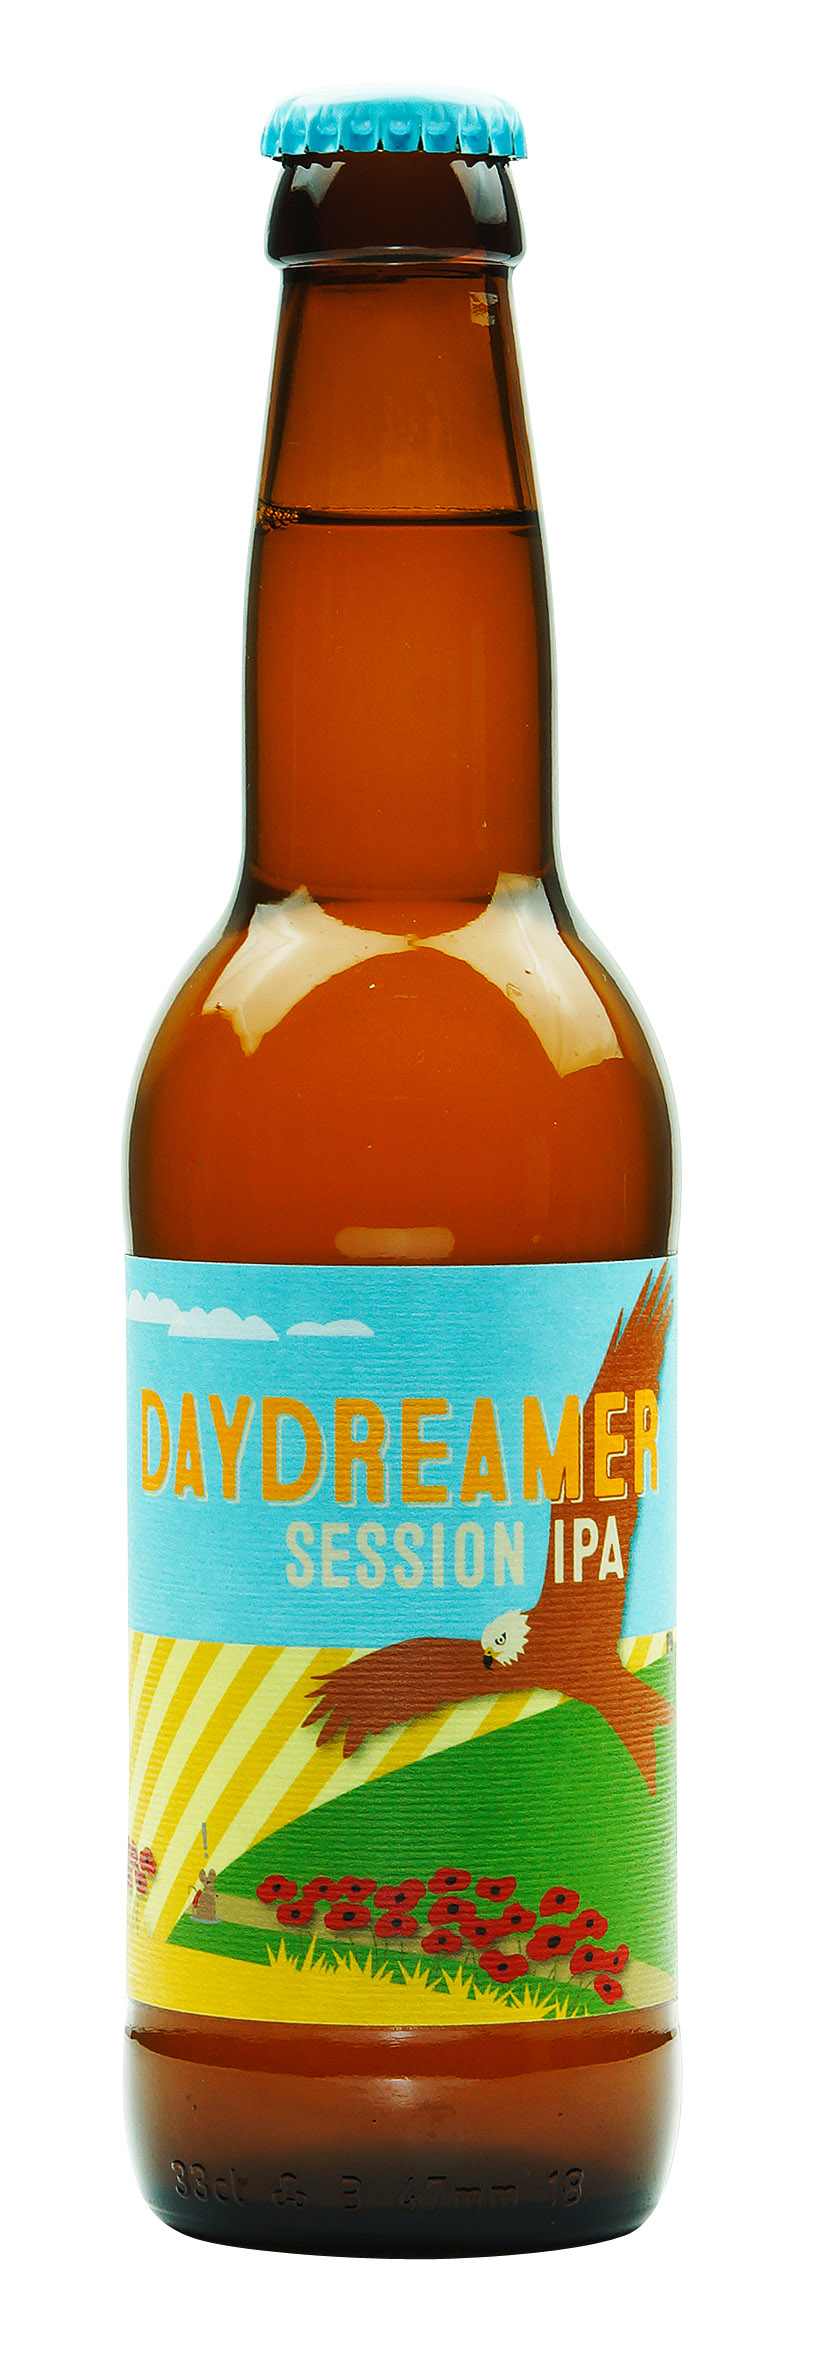 Daydreamer Session IPA 0